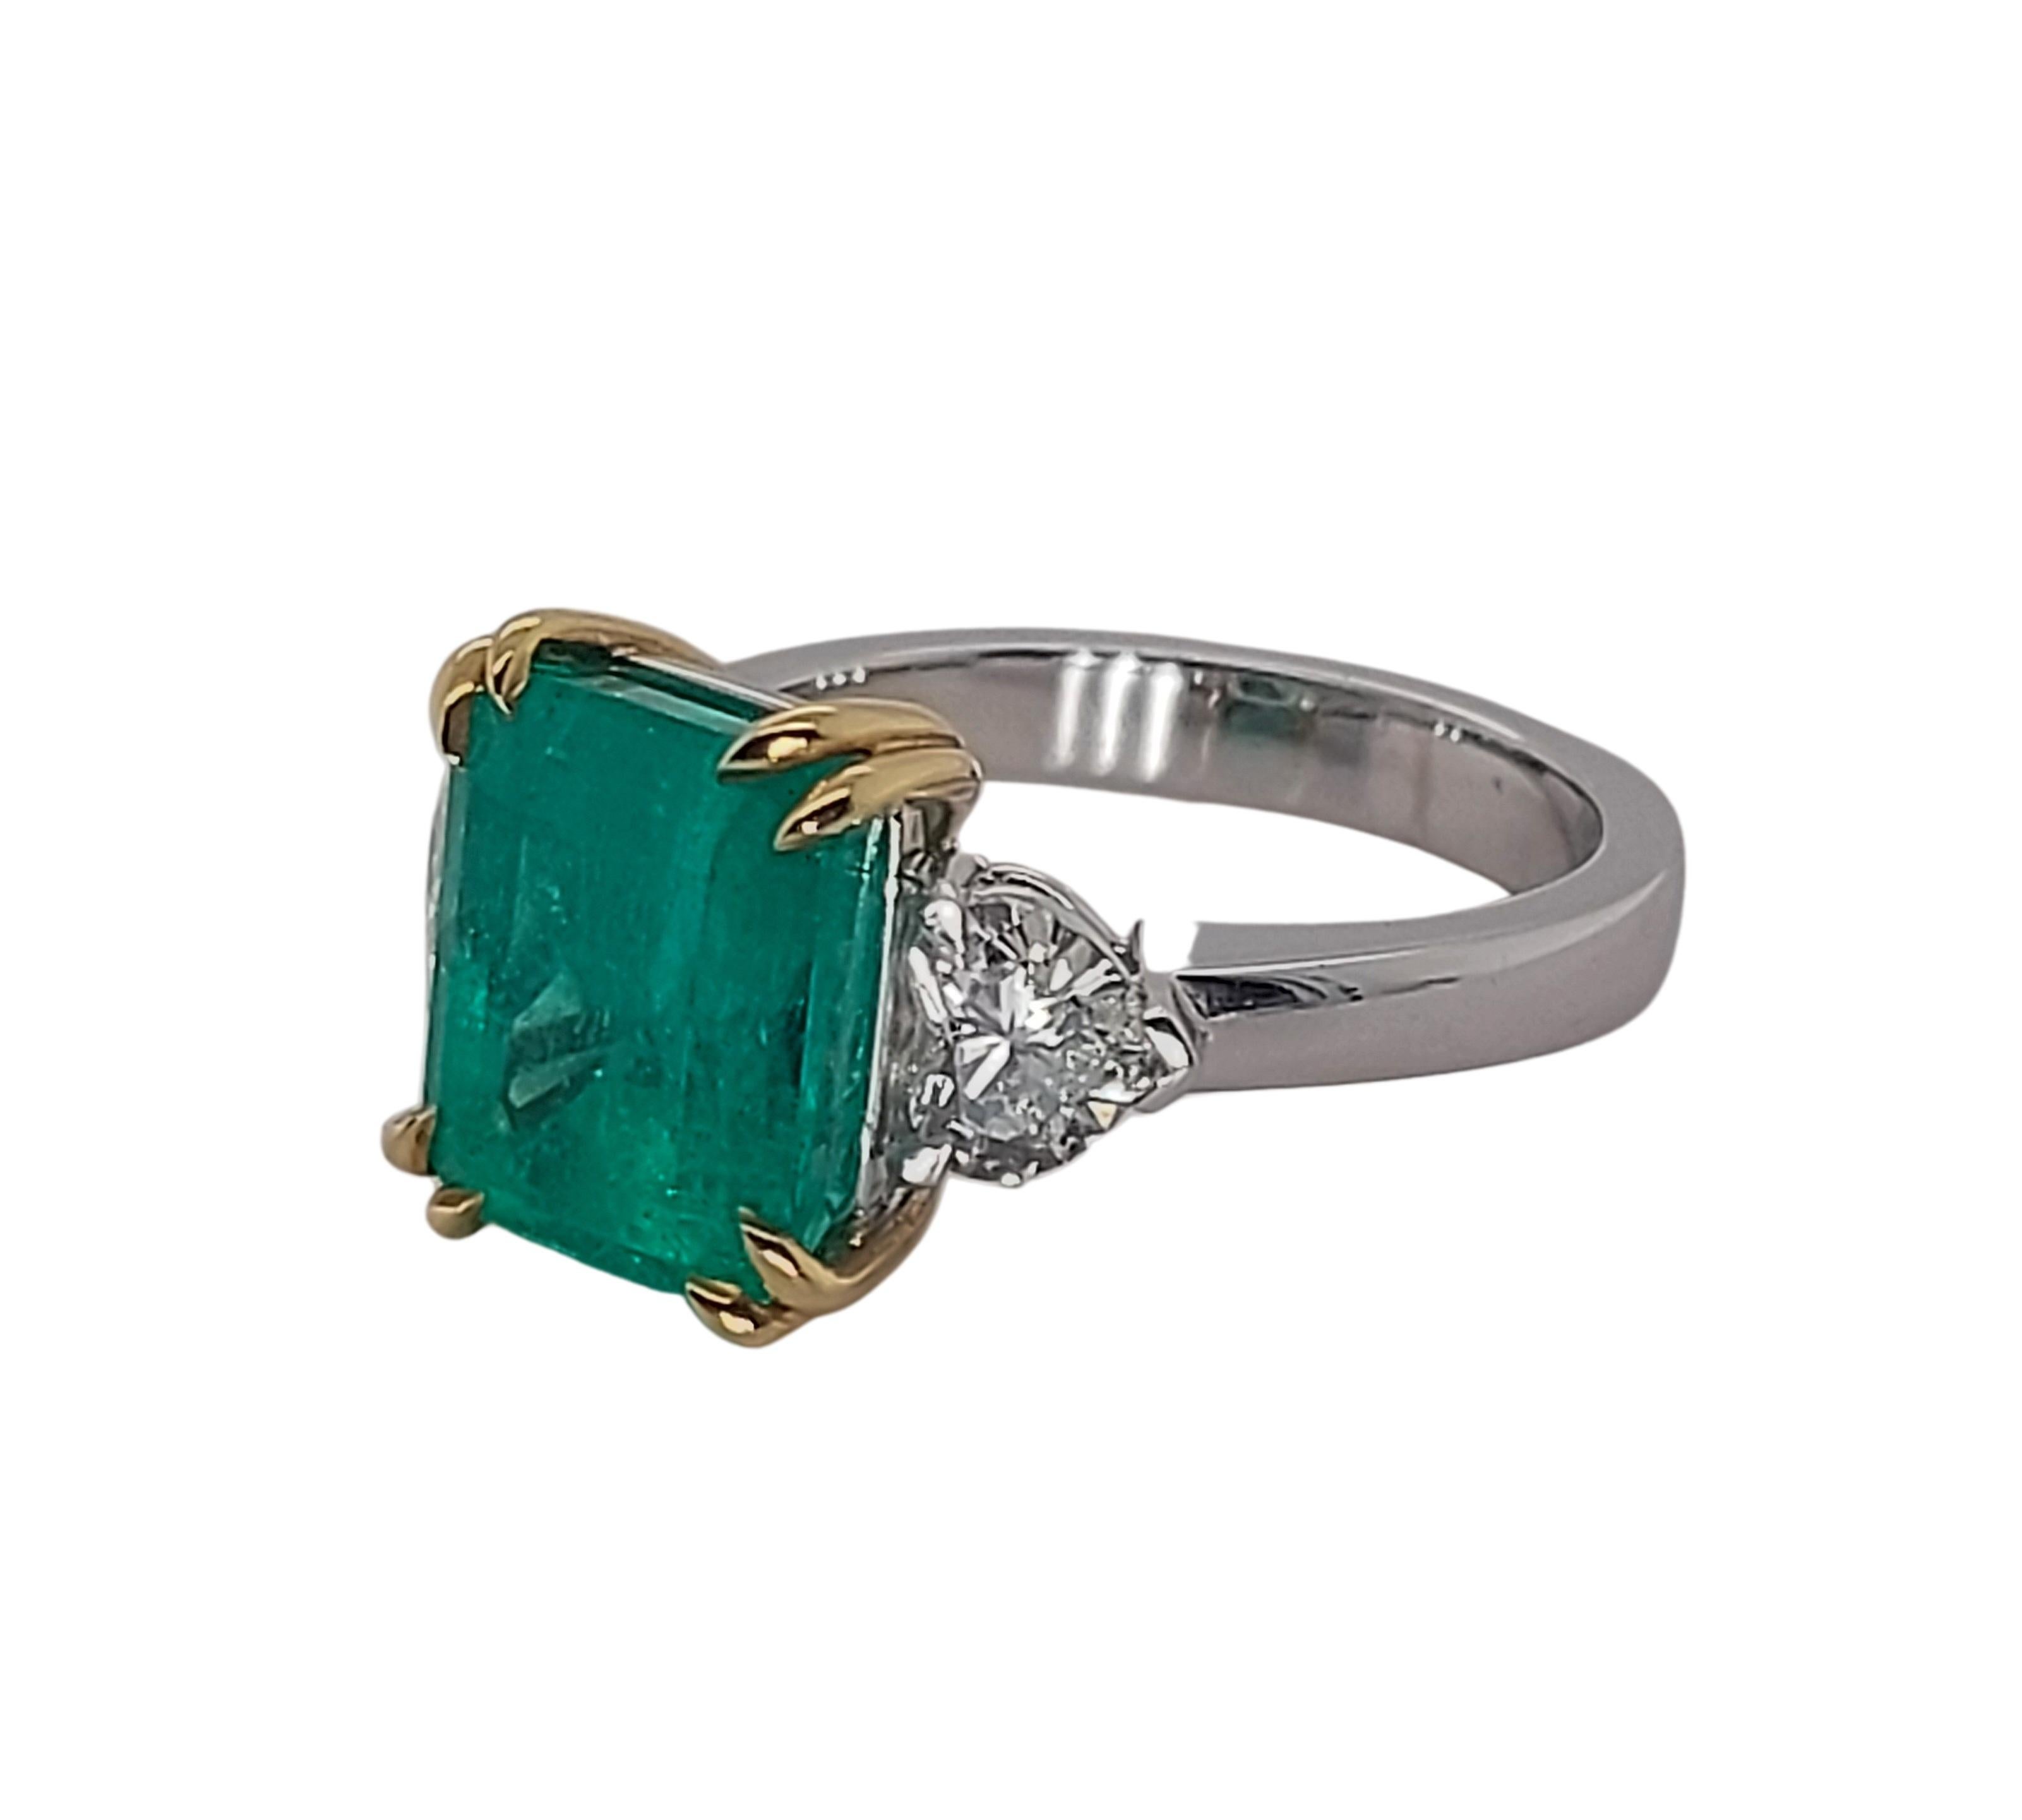 Heart Cut 18kt White Gold Ring Wth 5.23ct Colombian Emerald & 0.93ct Heart Shaped Diamonds For Sale